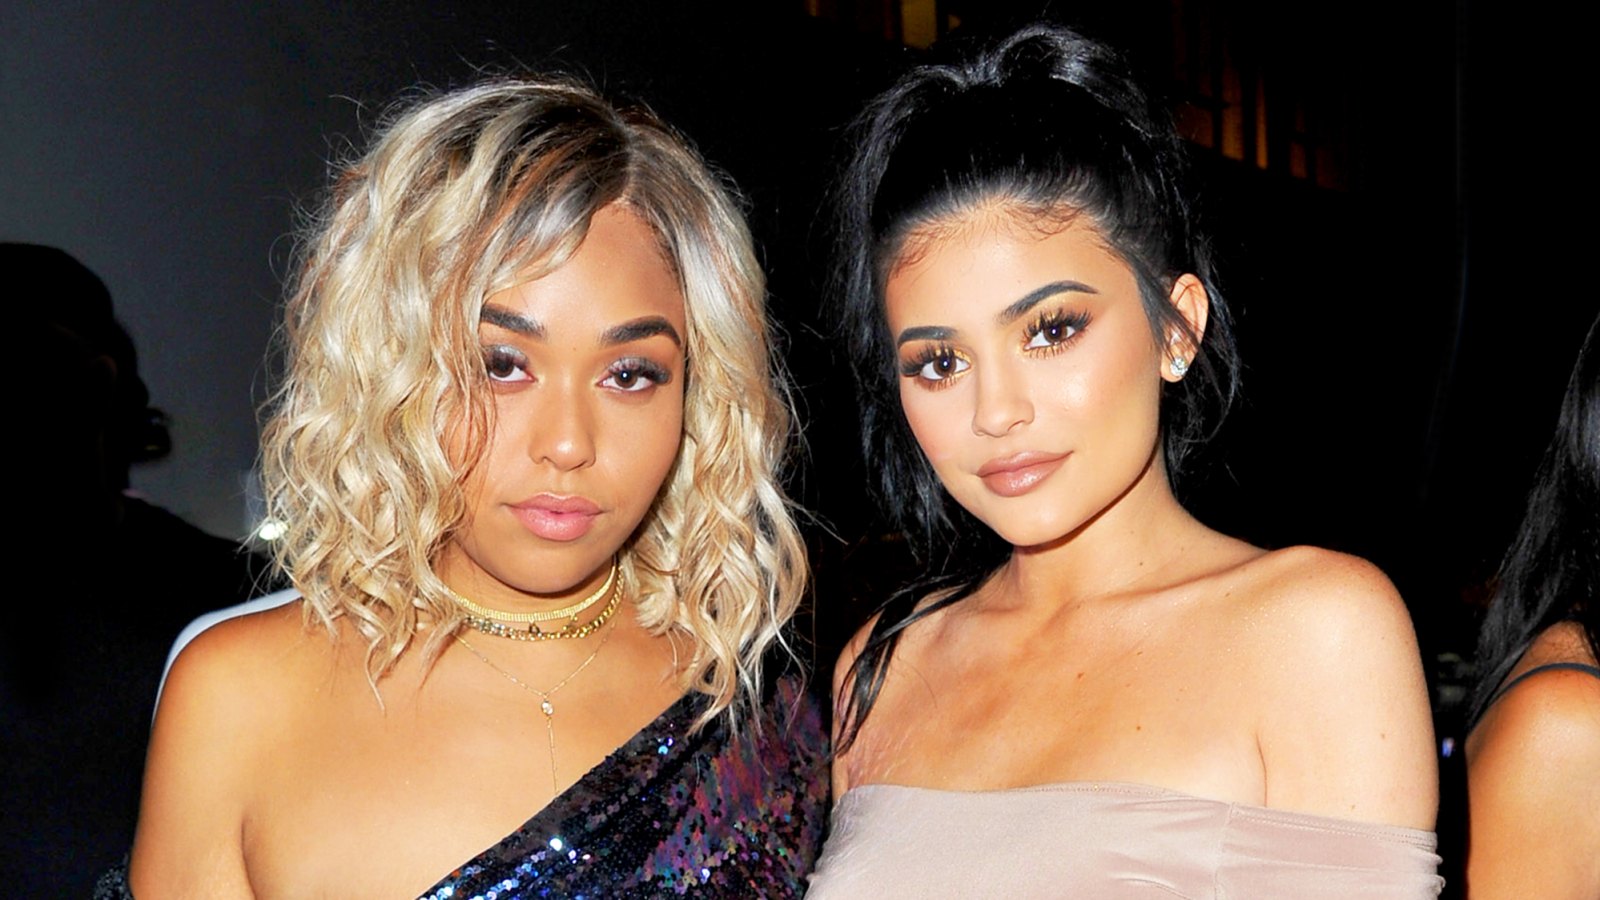 Jordyn Woods and Kylie Jenner attend Boohoo X Jordyn Woods 2016 Fashion Event at NeueHouse Hollywood in Los Angeles, California.